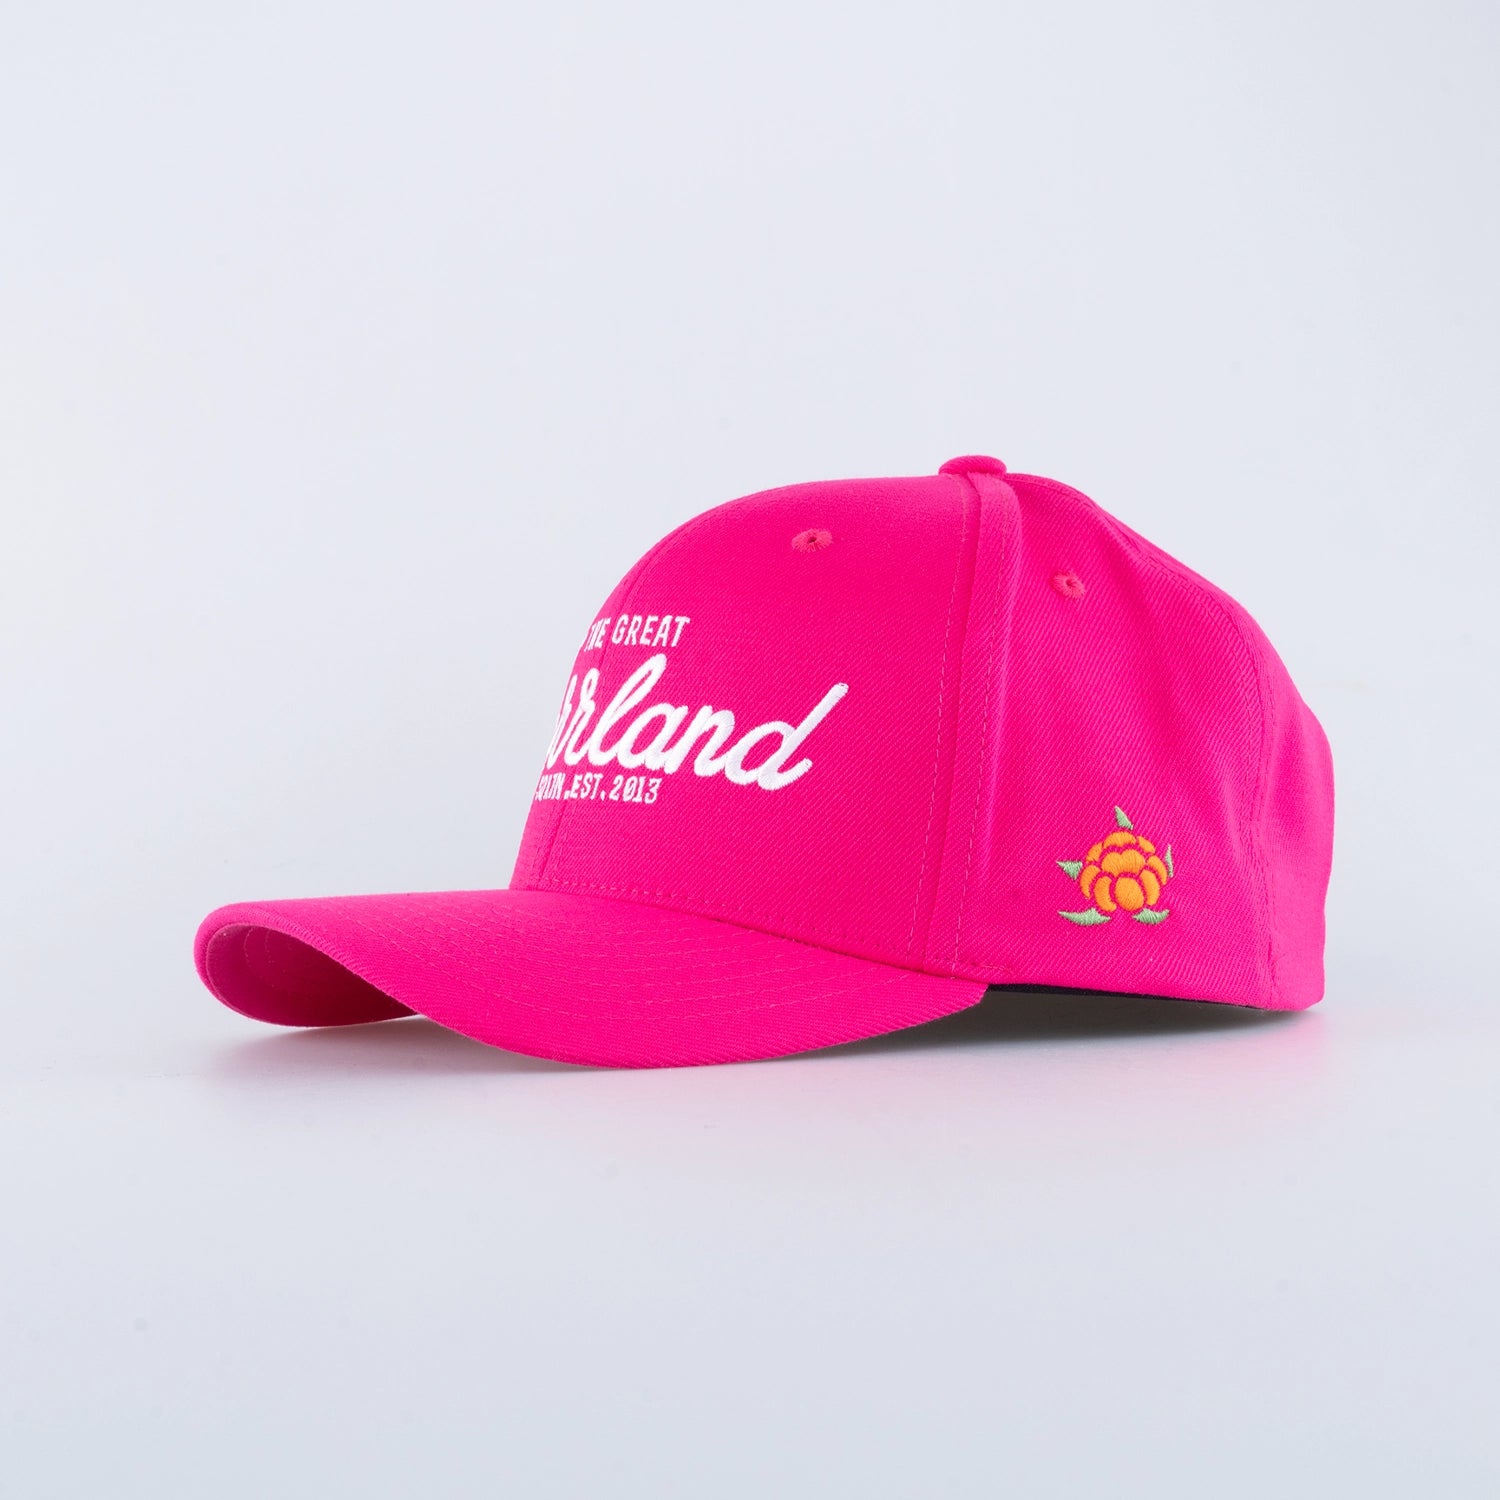 GREAT NORRLAND 120 KEPS - HOT PINK